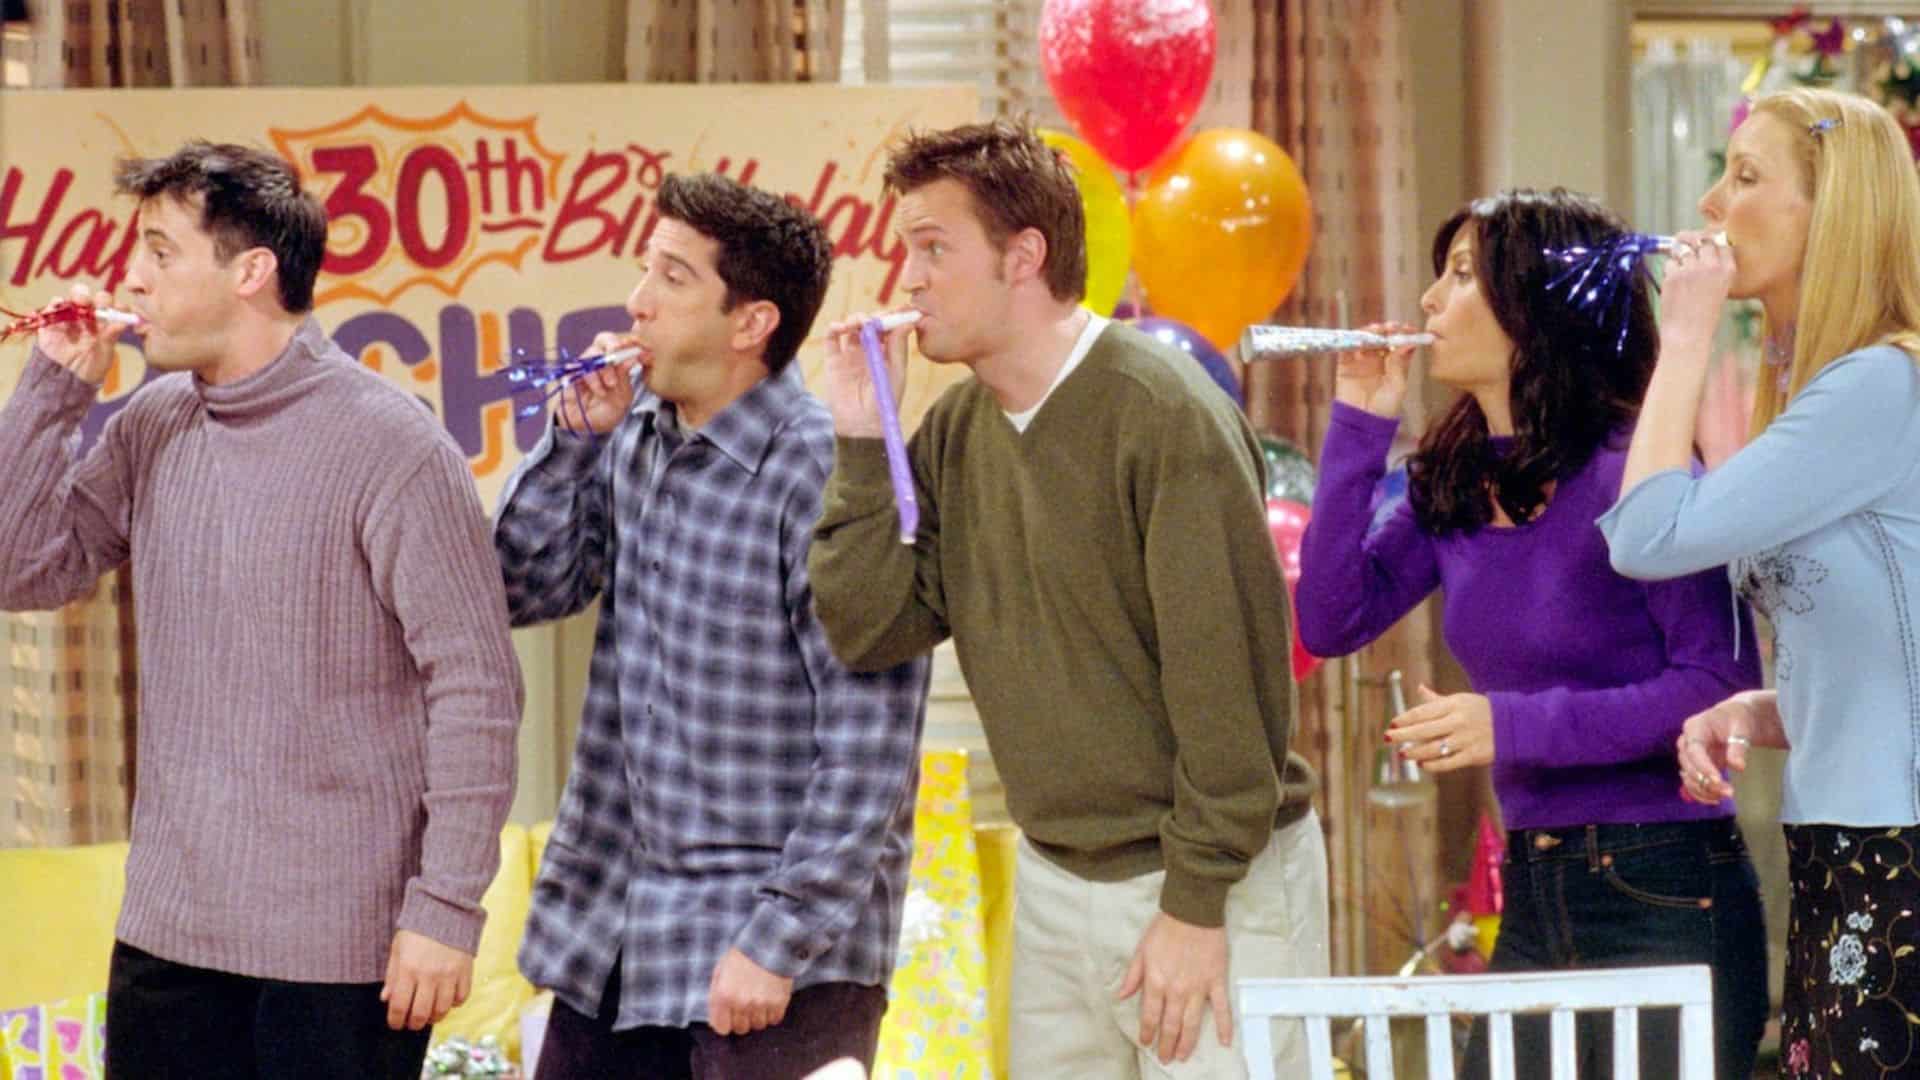 Joey, Ross, Chandler, Monica, and Phoebe wish Rachel a happy birthday in this image from Bright/Kauffman/Crane Productions